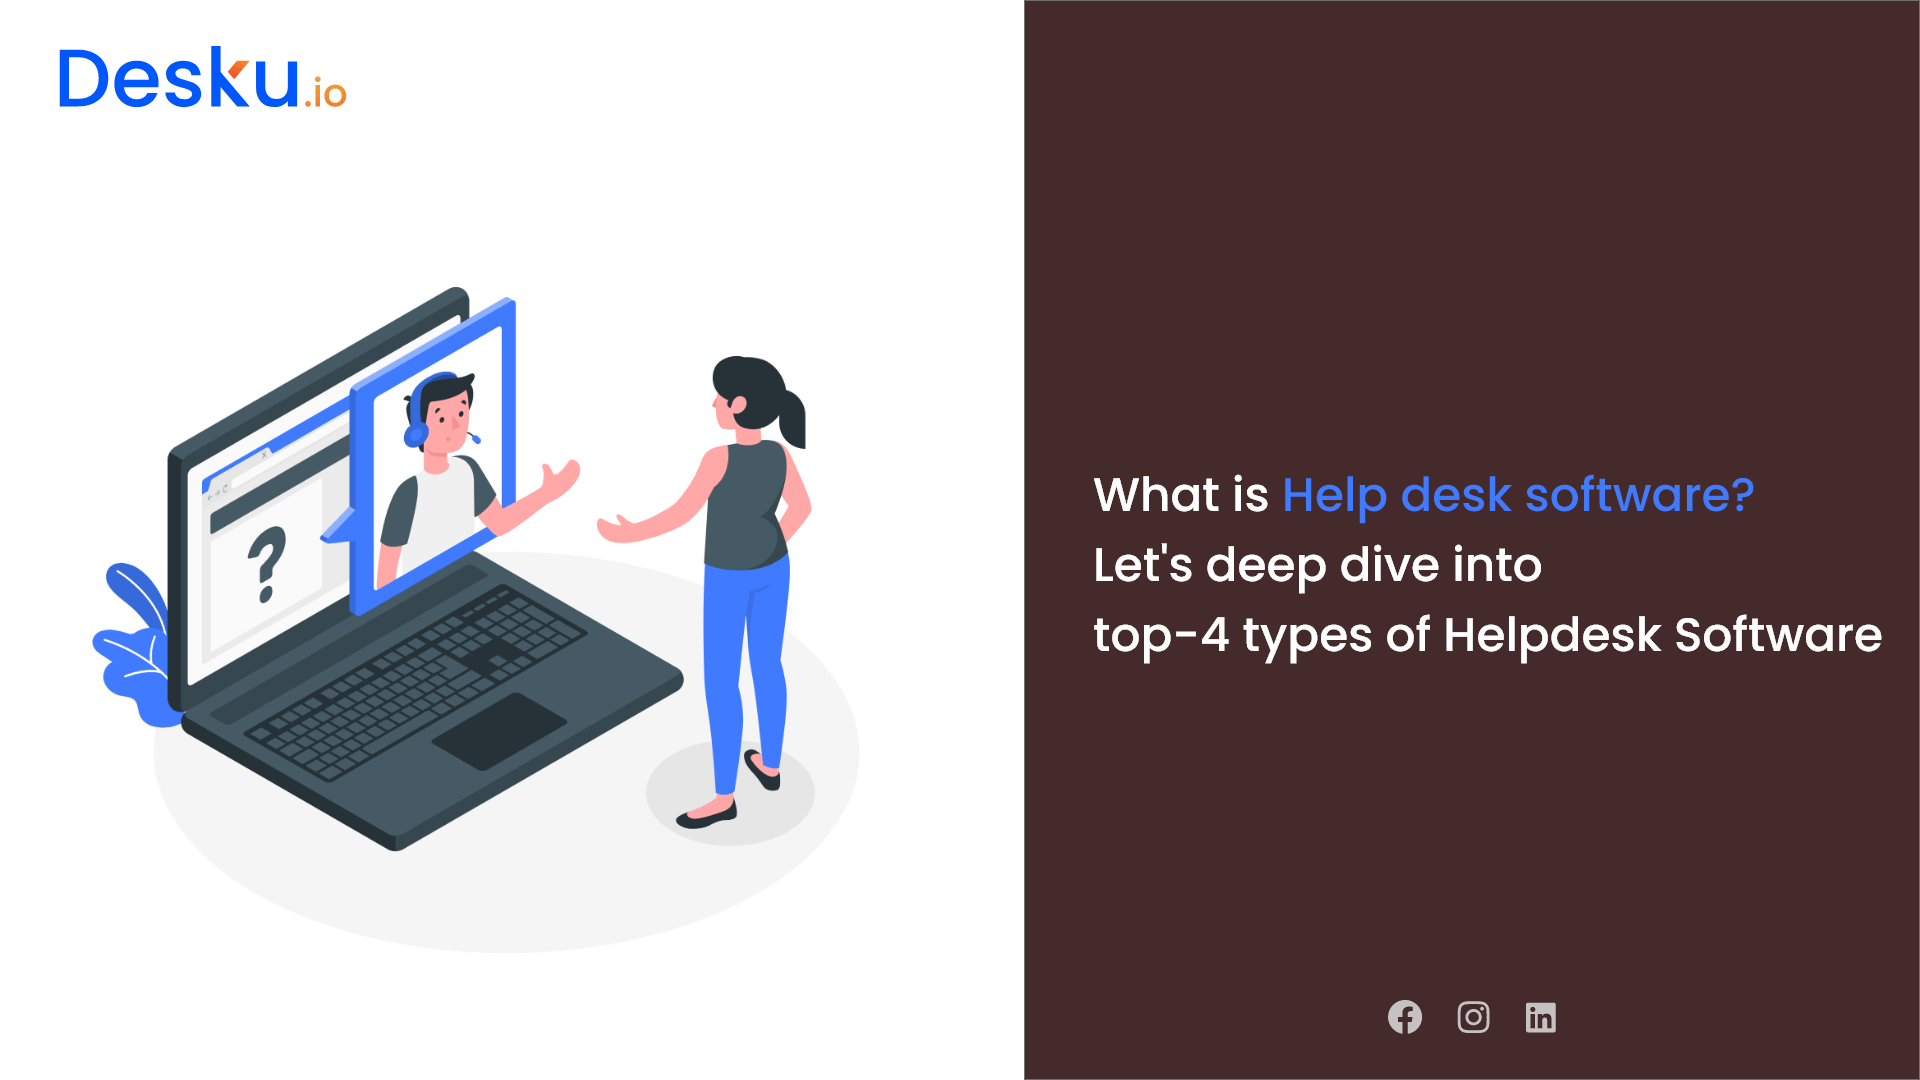 What is help desk software lets deep dive into top 4 types of helpdesk software